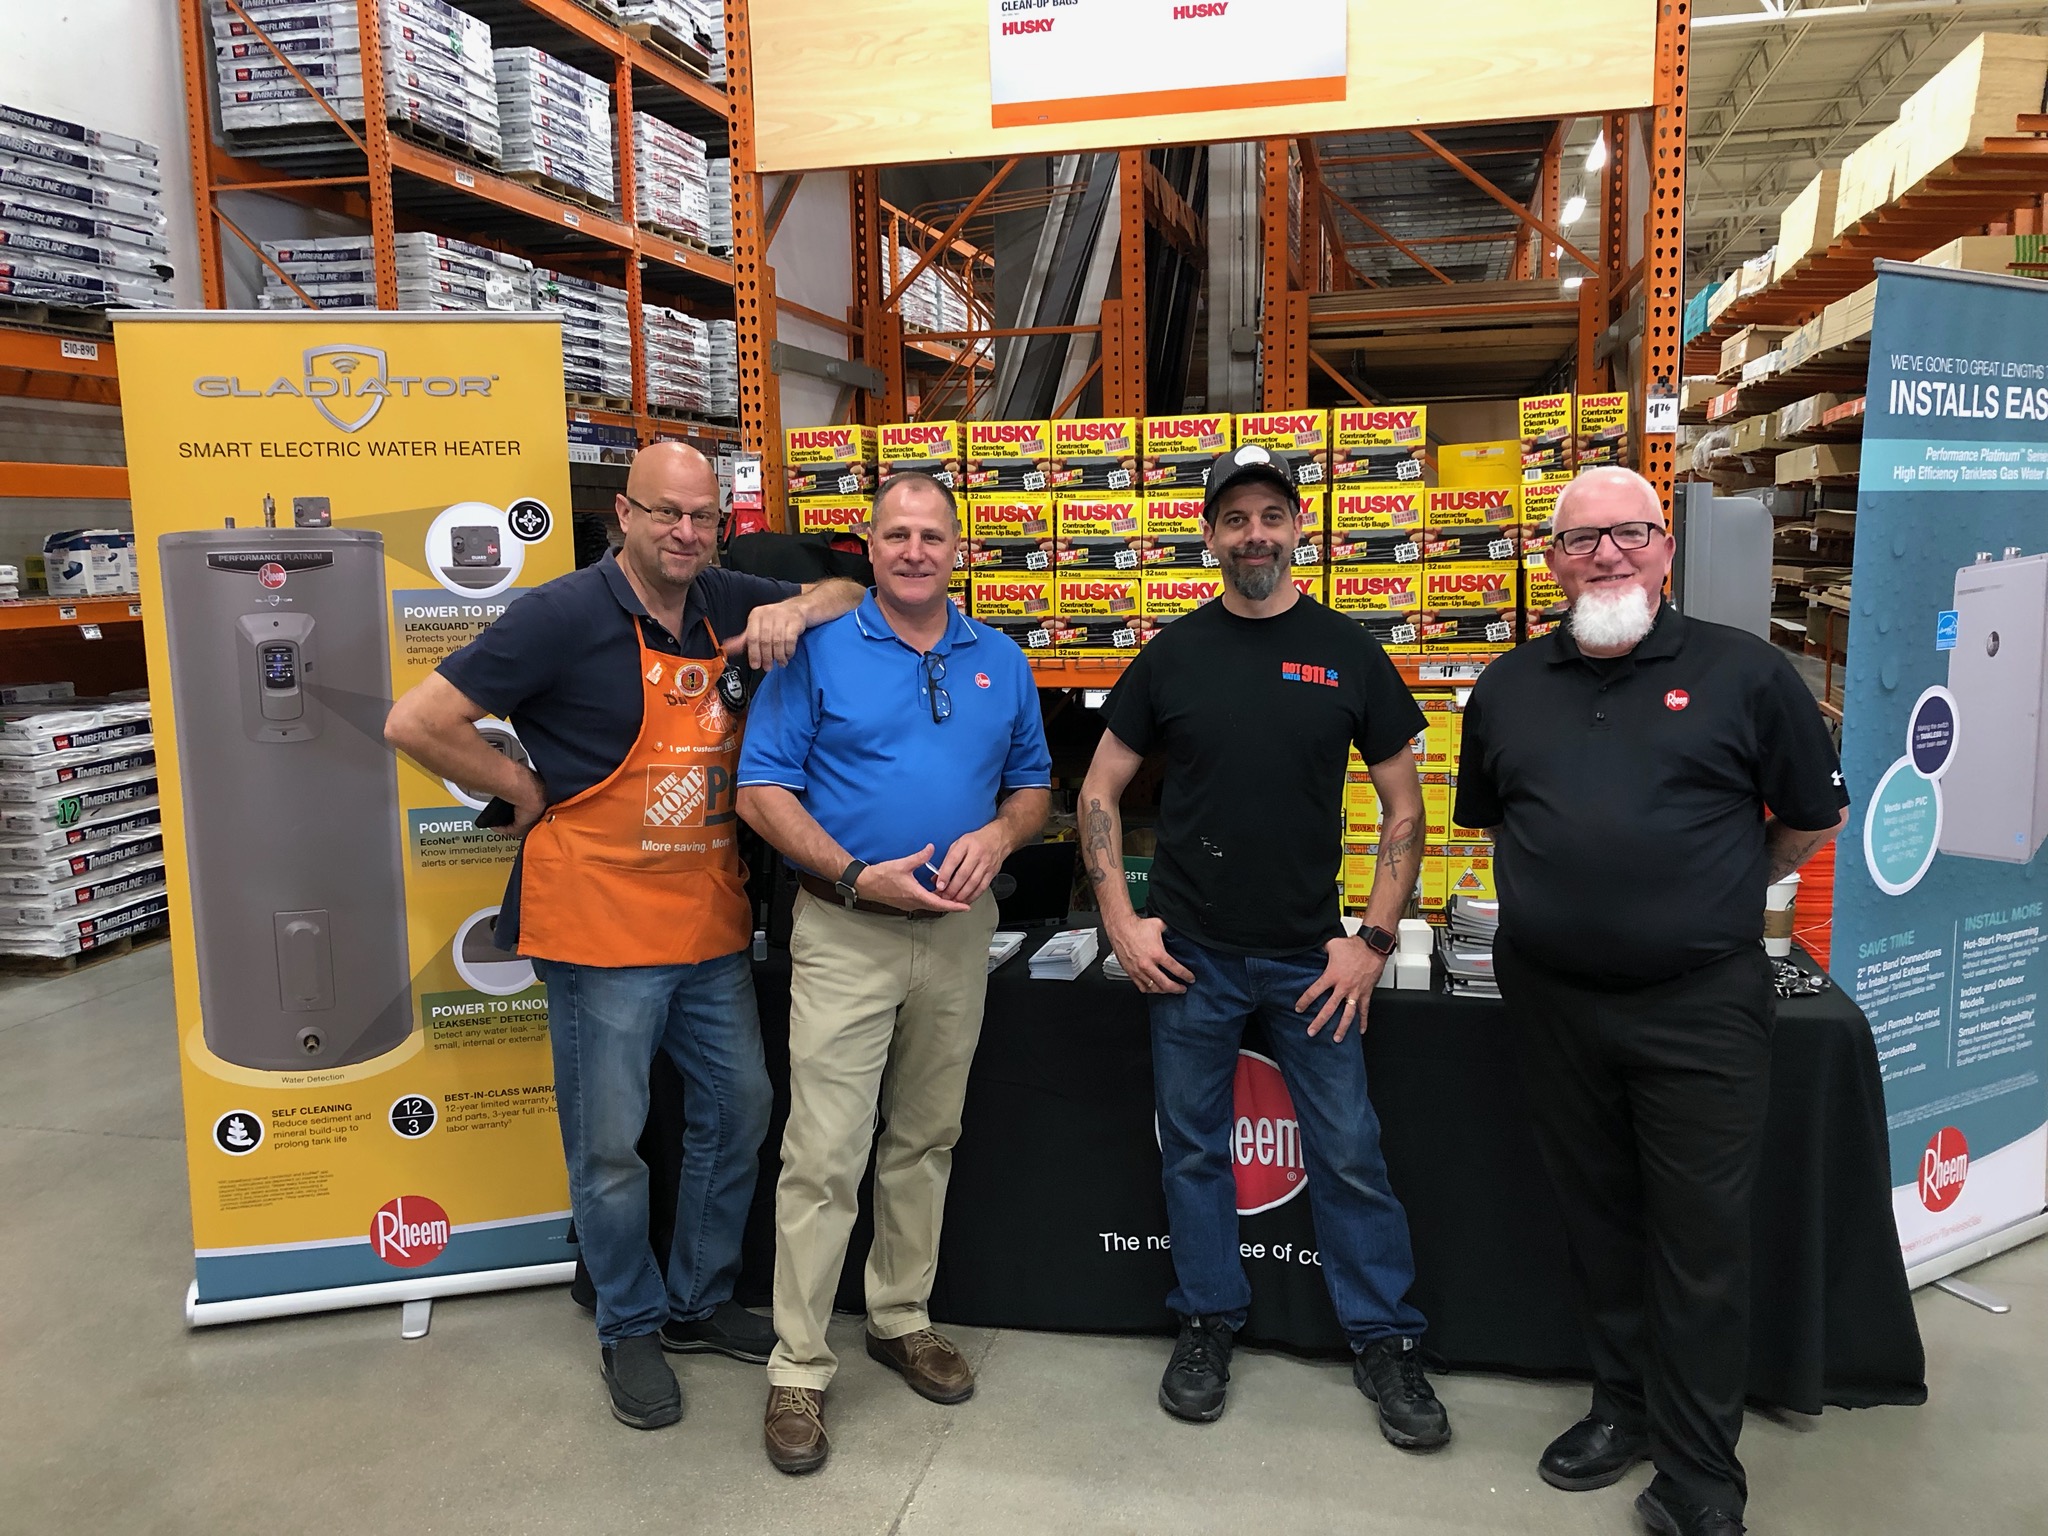 Hot Water 911, Rheem and Home Depot – What a Team!